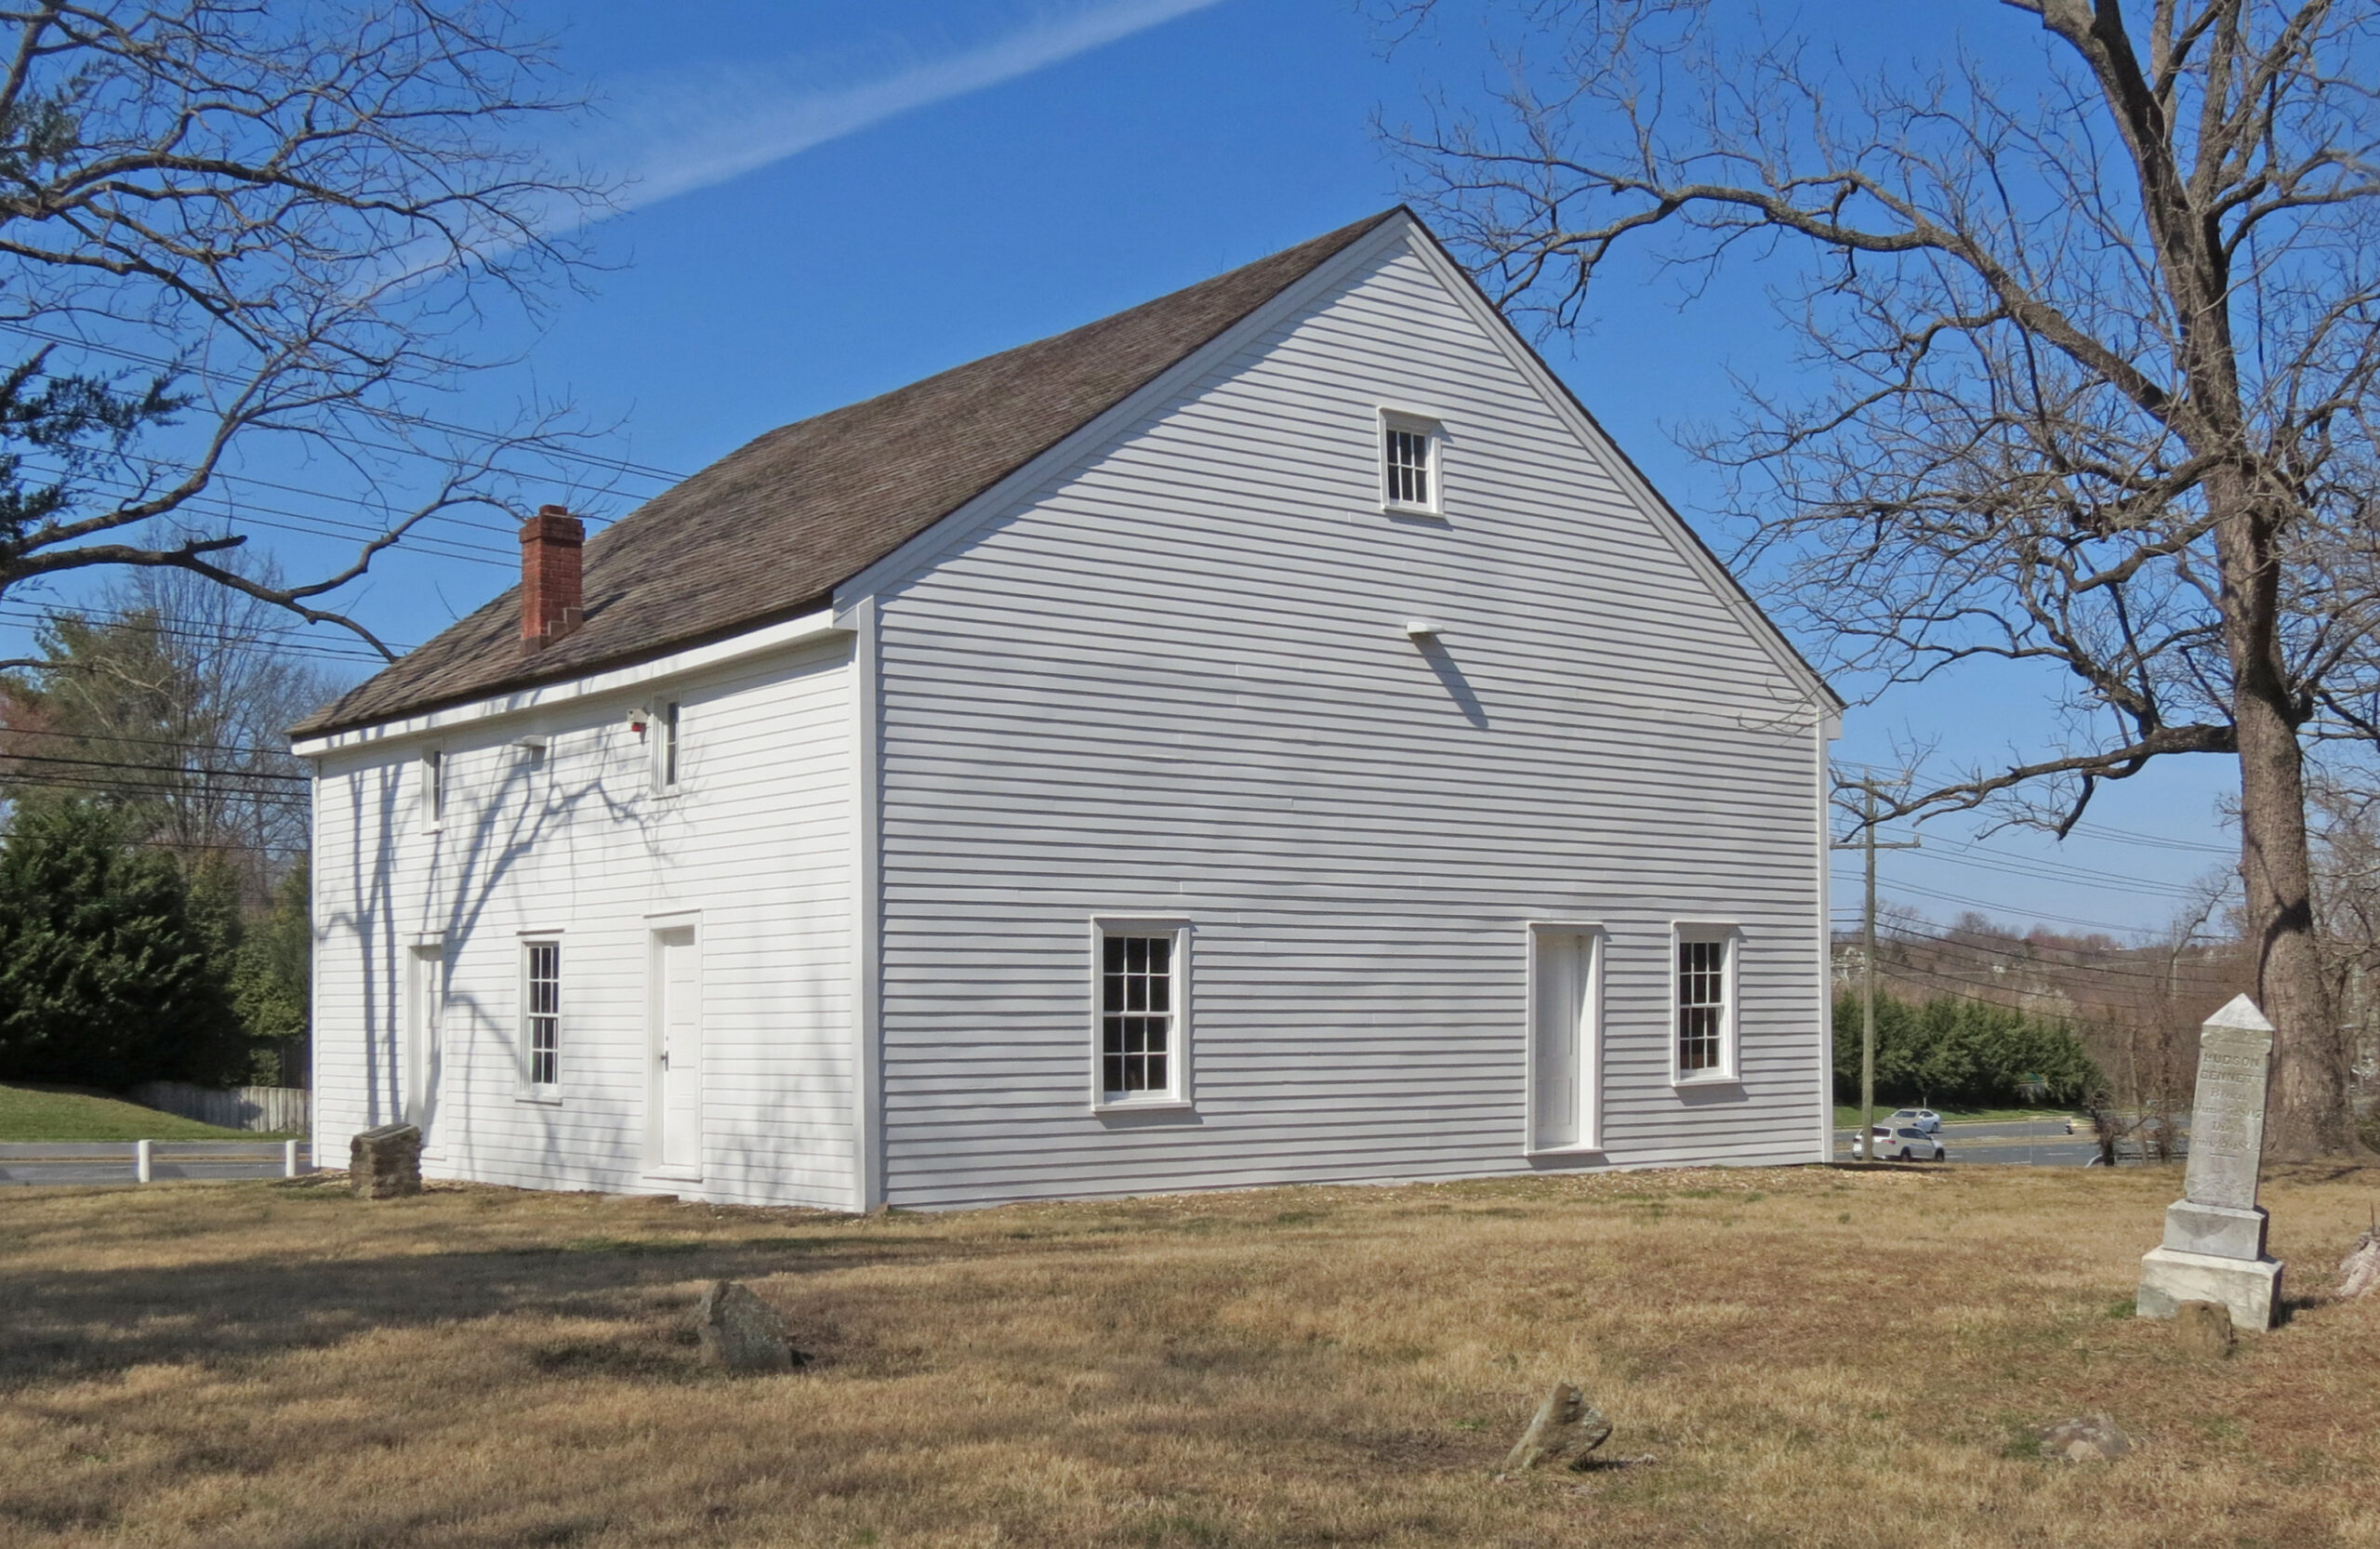 029-0015_Frying_Pan_Meetinghouse_2023_exterior_front_oblique_VLR_Online-scaled